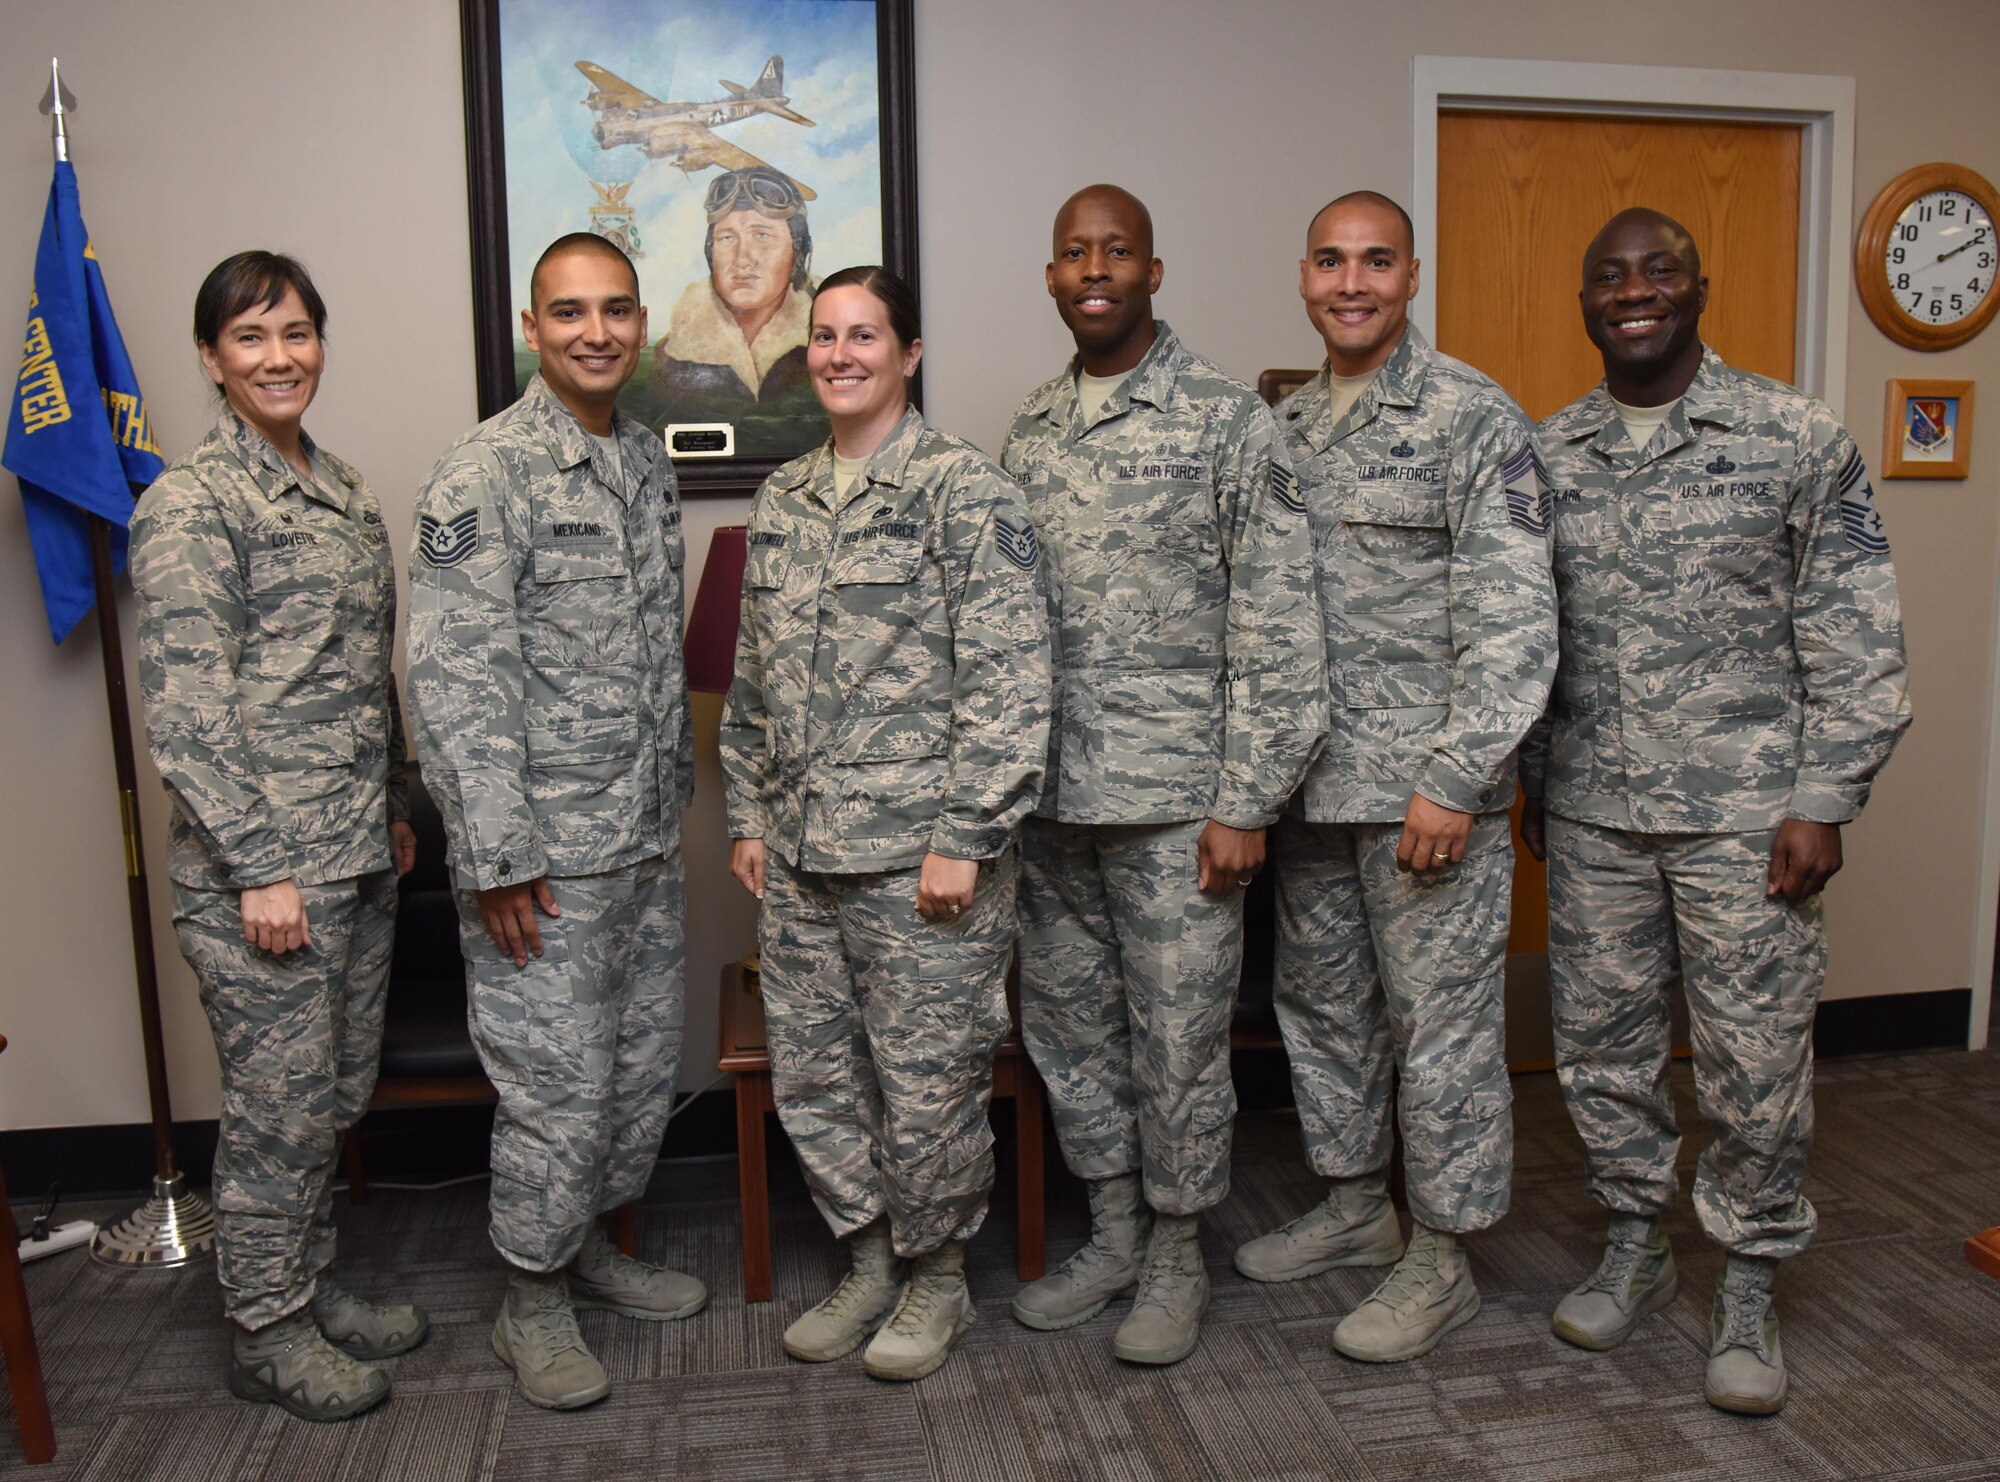 Congrats to Tech. Sgts. Raul Mexicano, Andrea Caldwell and Julian Blyden from the Mathies NCO Academy for being recognized by the 81st Training Wing leadership during this week’s out and about. The Airmen received recognition for their outstanding leadership and service across Team Keesler and the Barnes Center for Enlisted Education. (U.S. Air Force photo by Kemberly Groue)